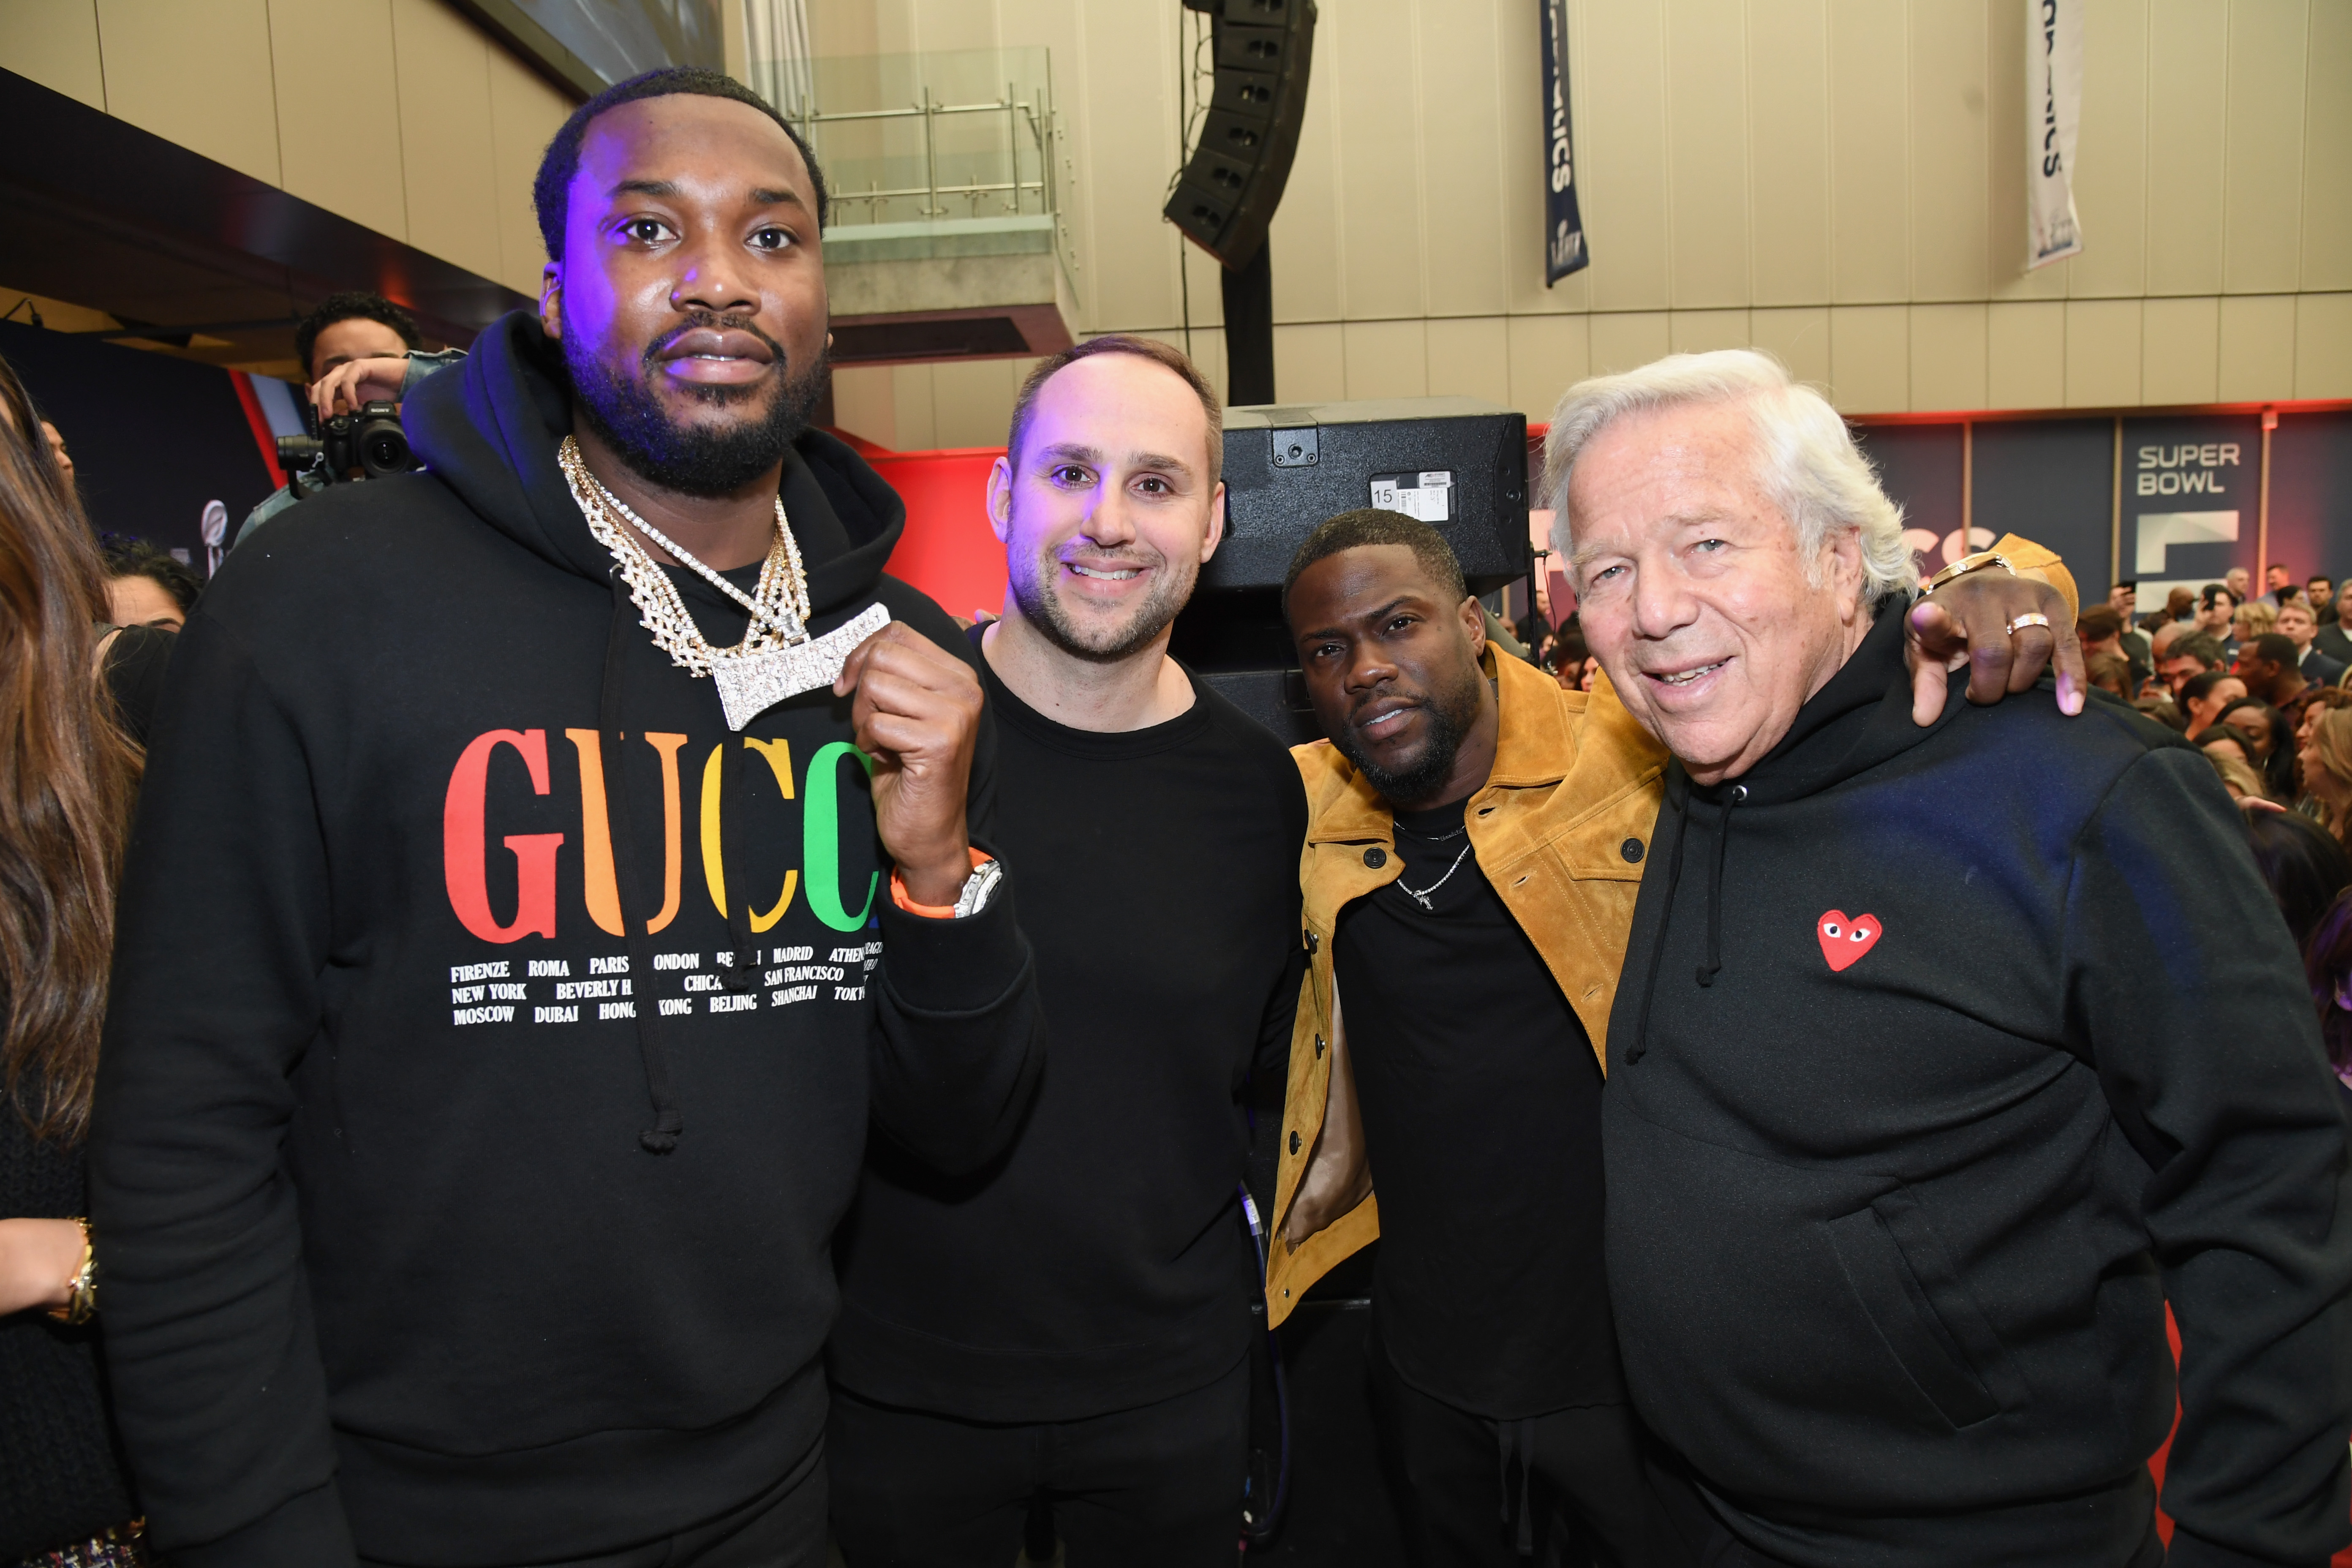 2Cool2Blog on X: Meek Mill spotted in Poland with Robert Kraft